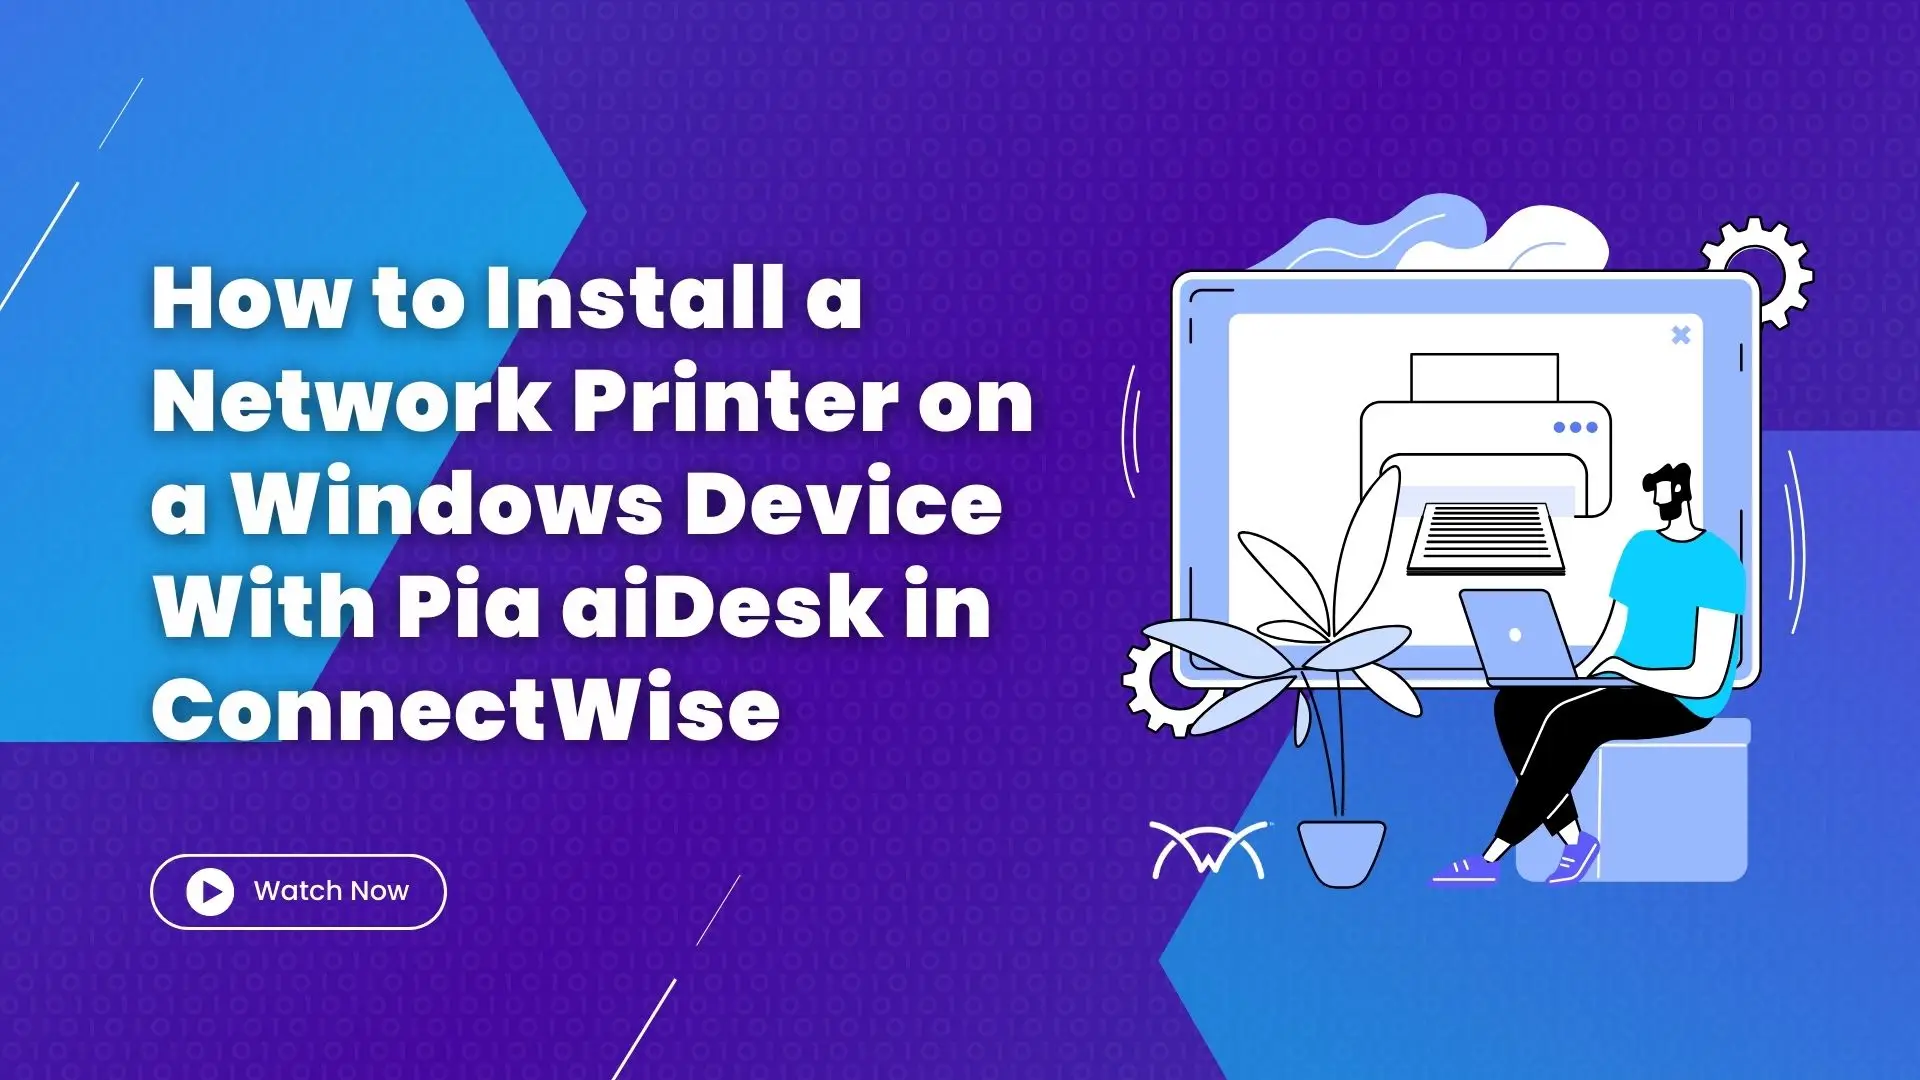 How to Install a Network Printer on a Windows Device With Pia aiDesk in ConnectWise